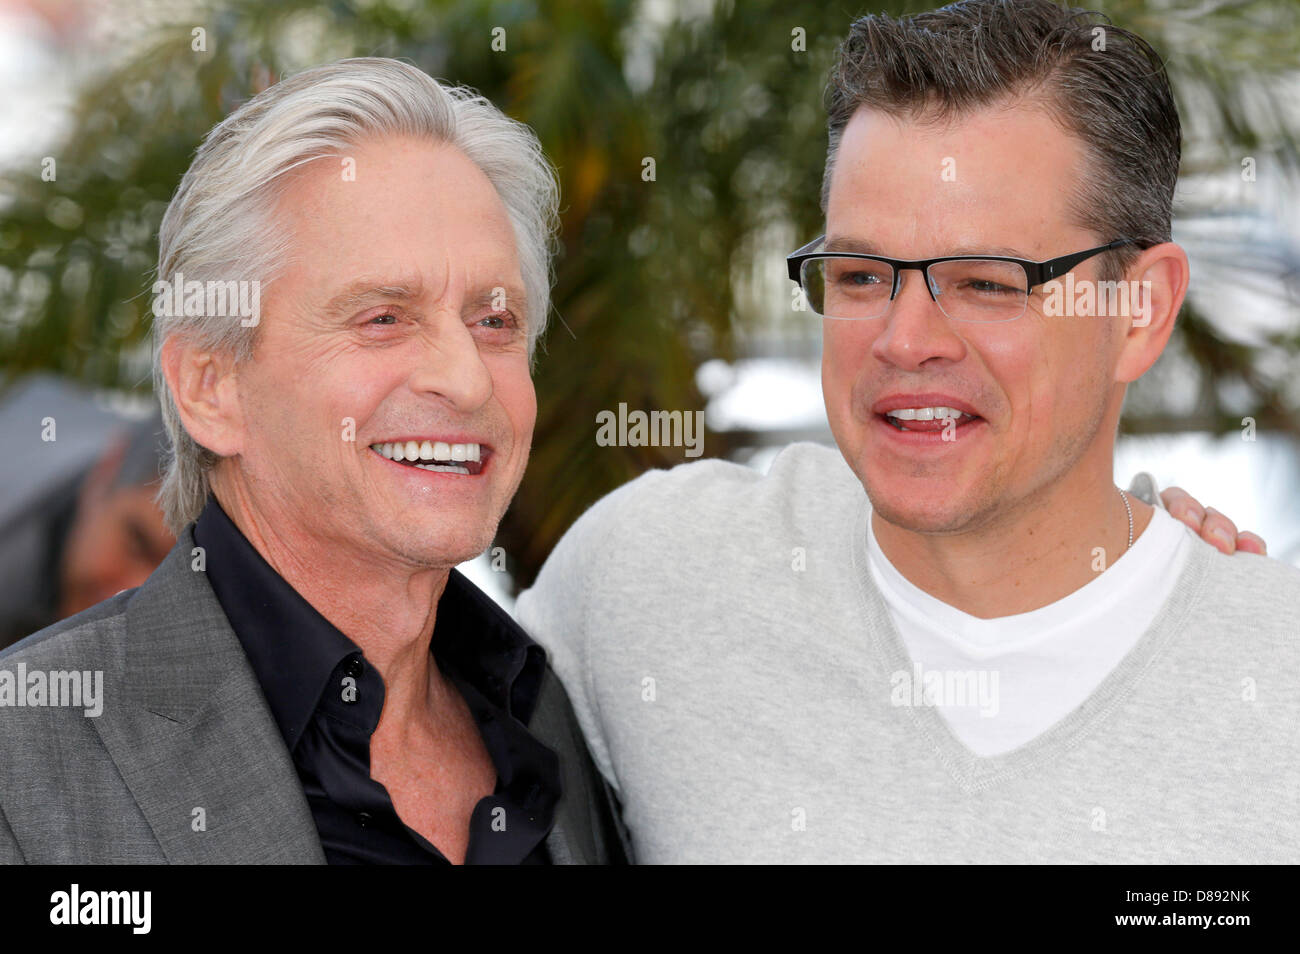 Michael Douglas And Matt Damon During The Behind The Candelabra Photocall At The 66th Cannes